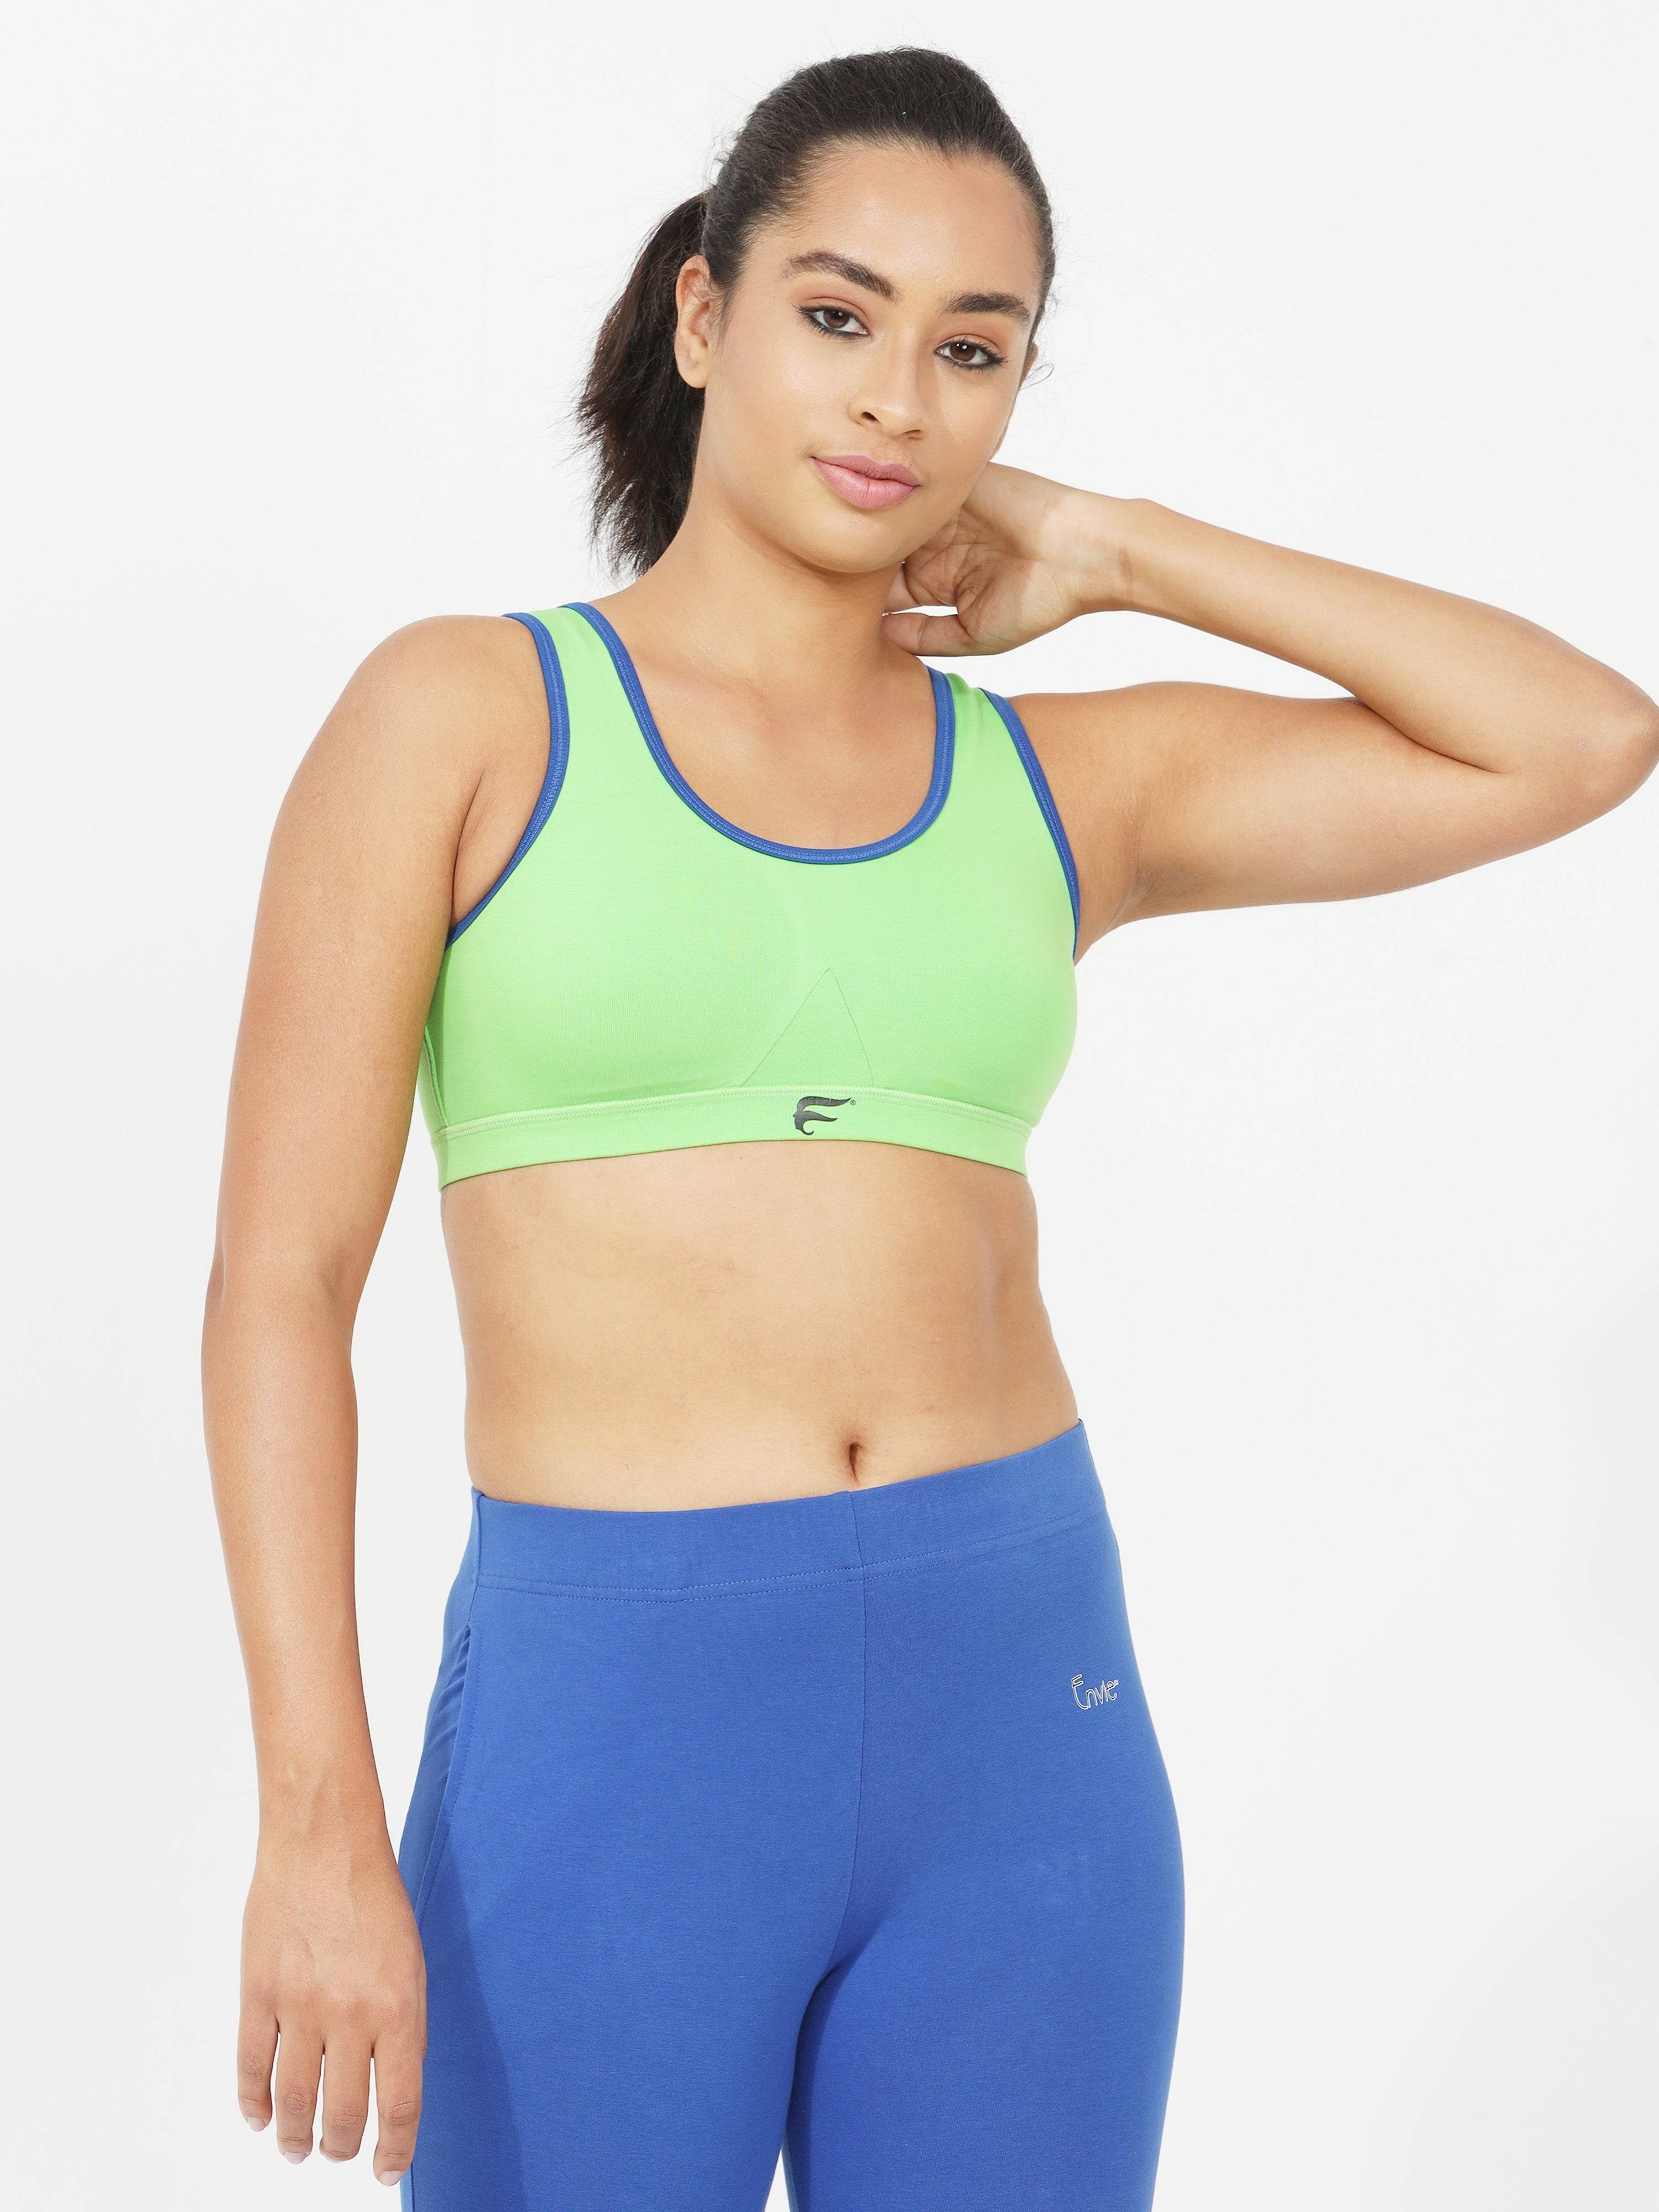 Plain Non-Padded Ladies Cotton Sports Bra, For Daily Wear, Size